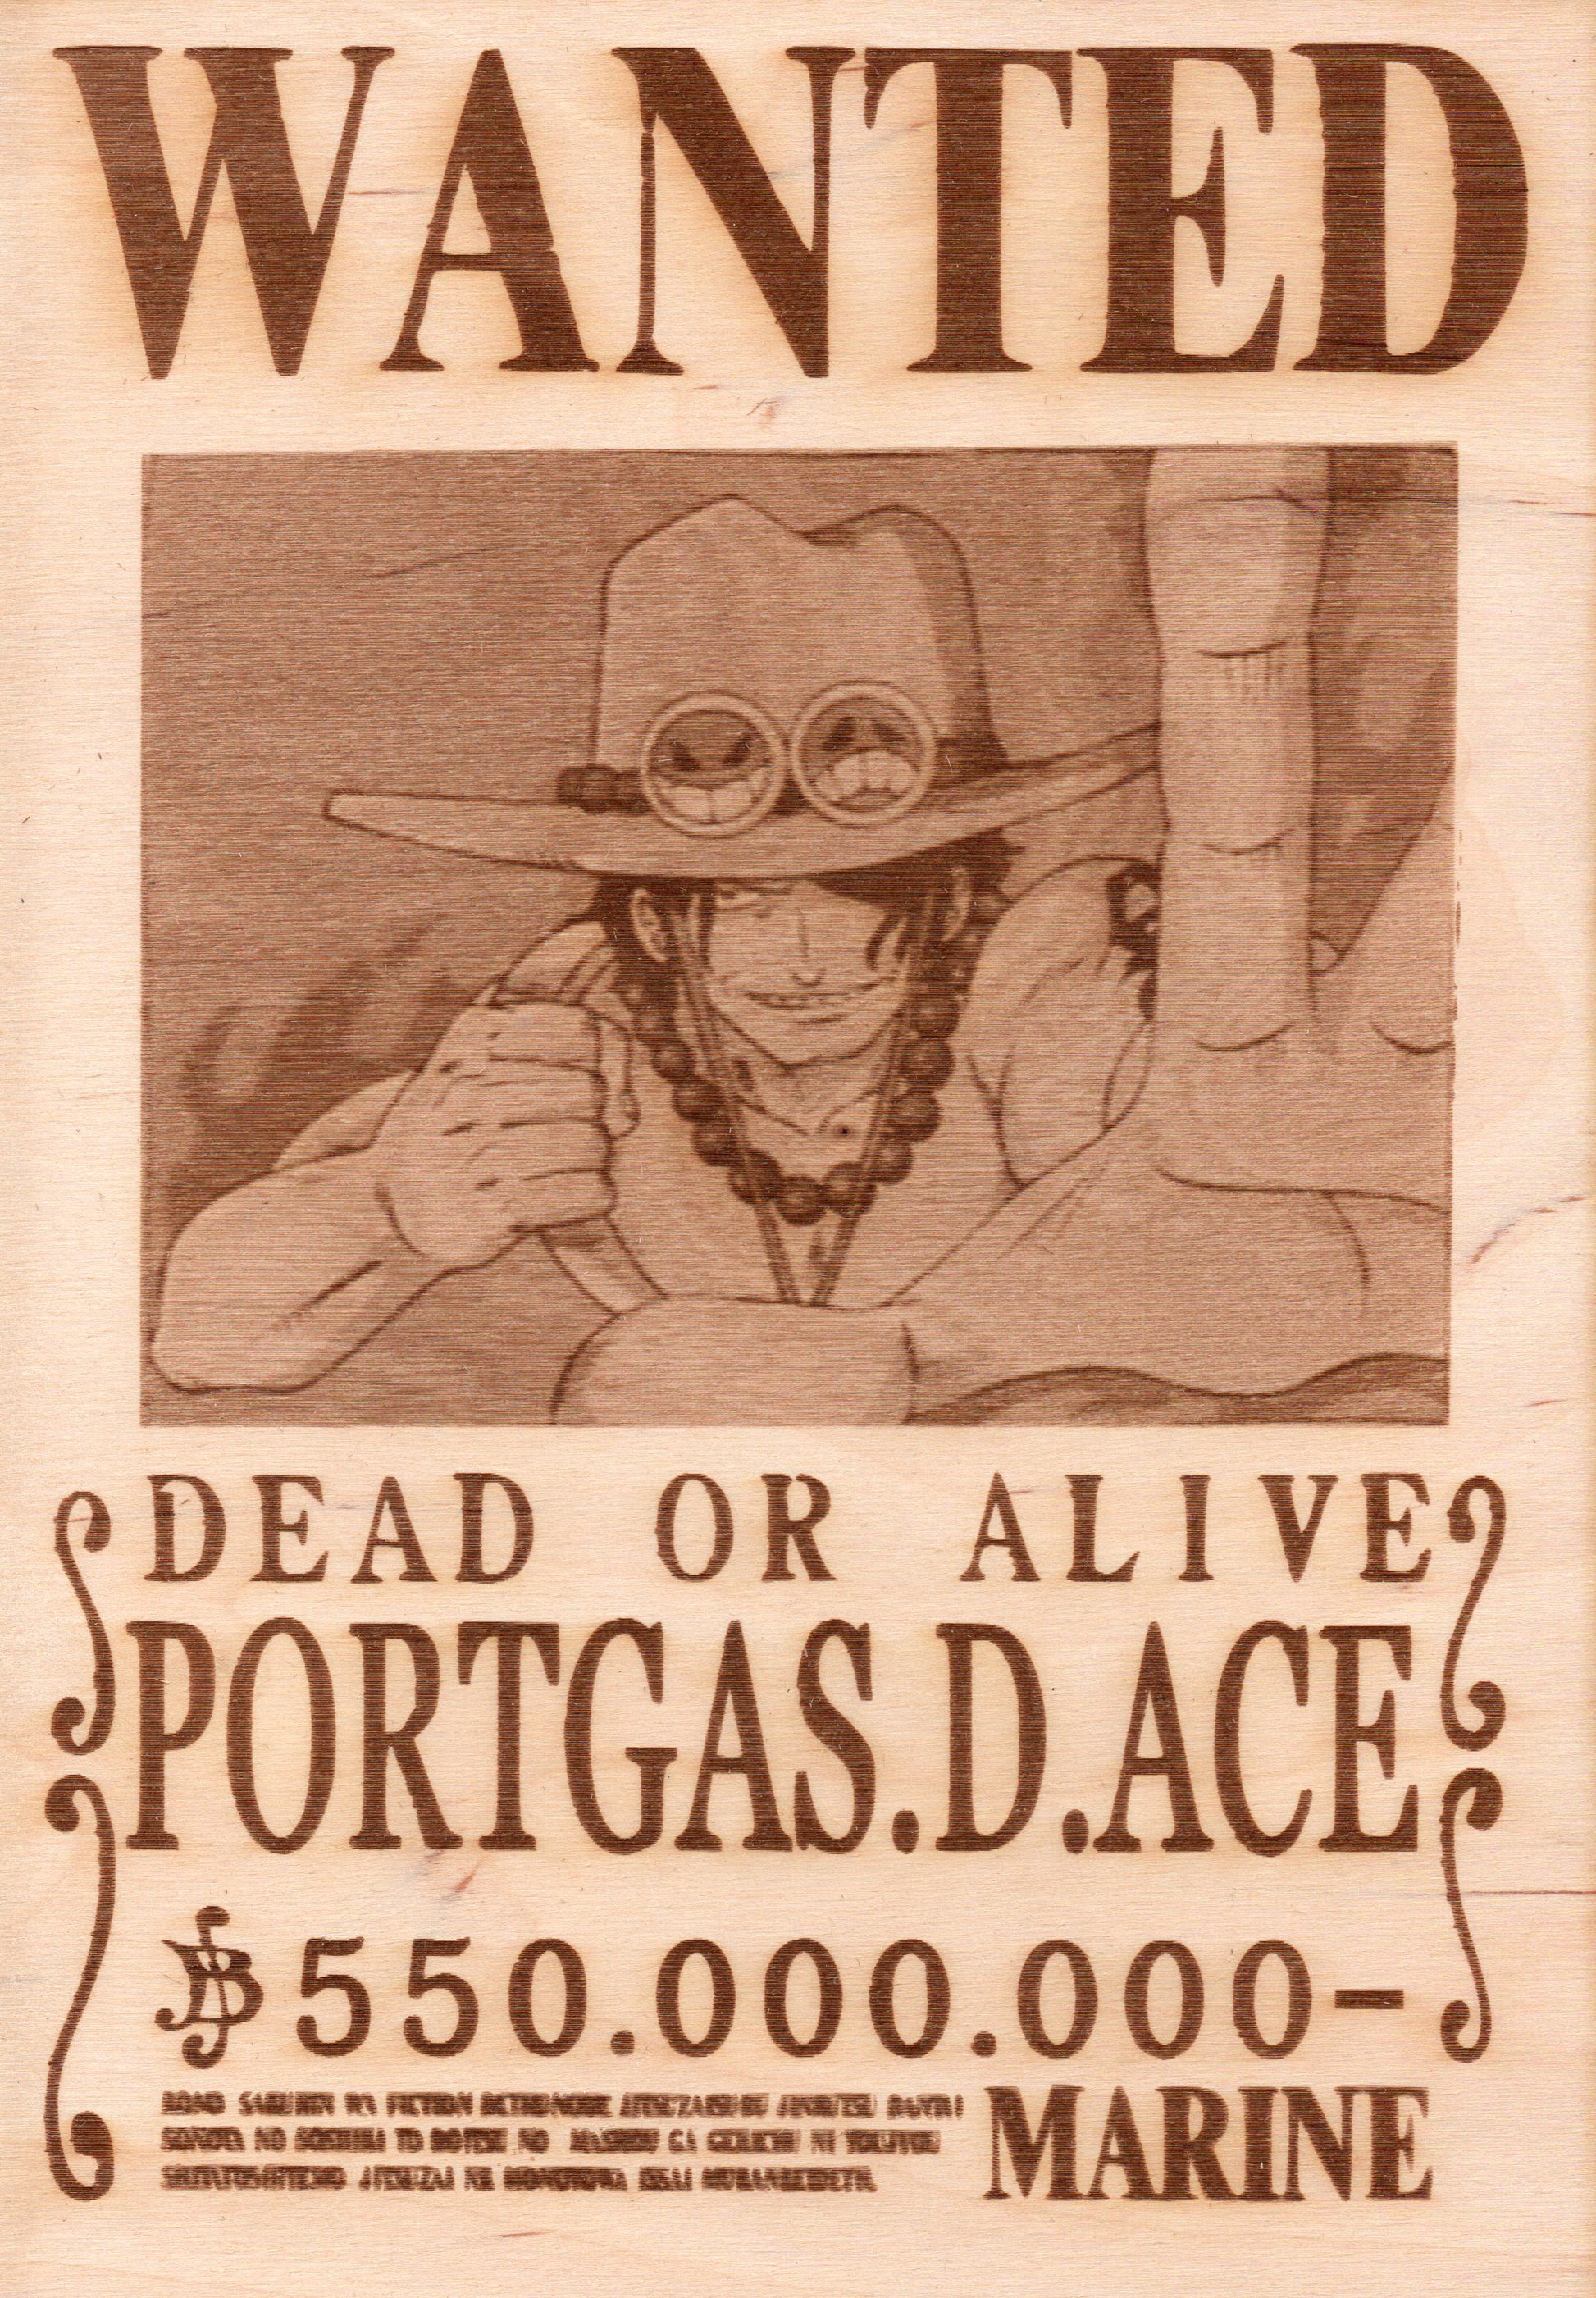 One Piece - Ace Wooden Wanted Poster - TantrumCollectibles.com